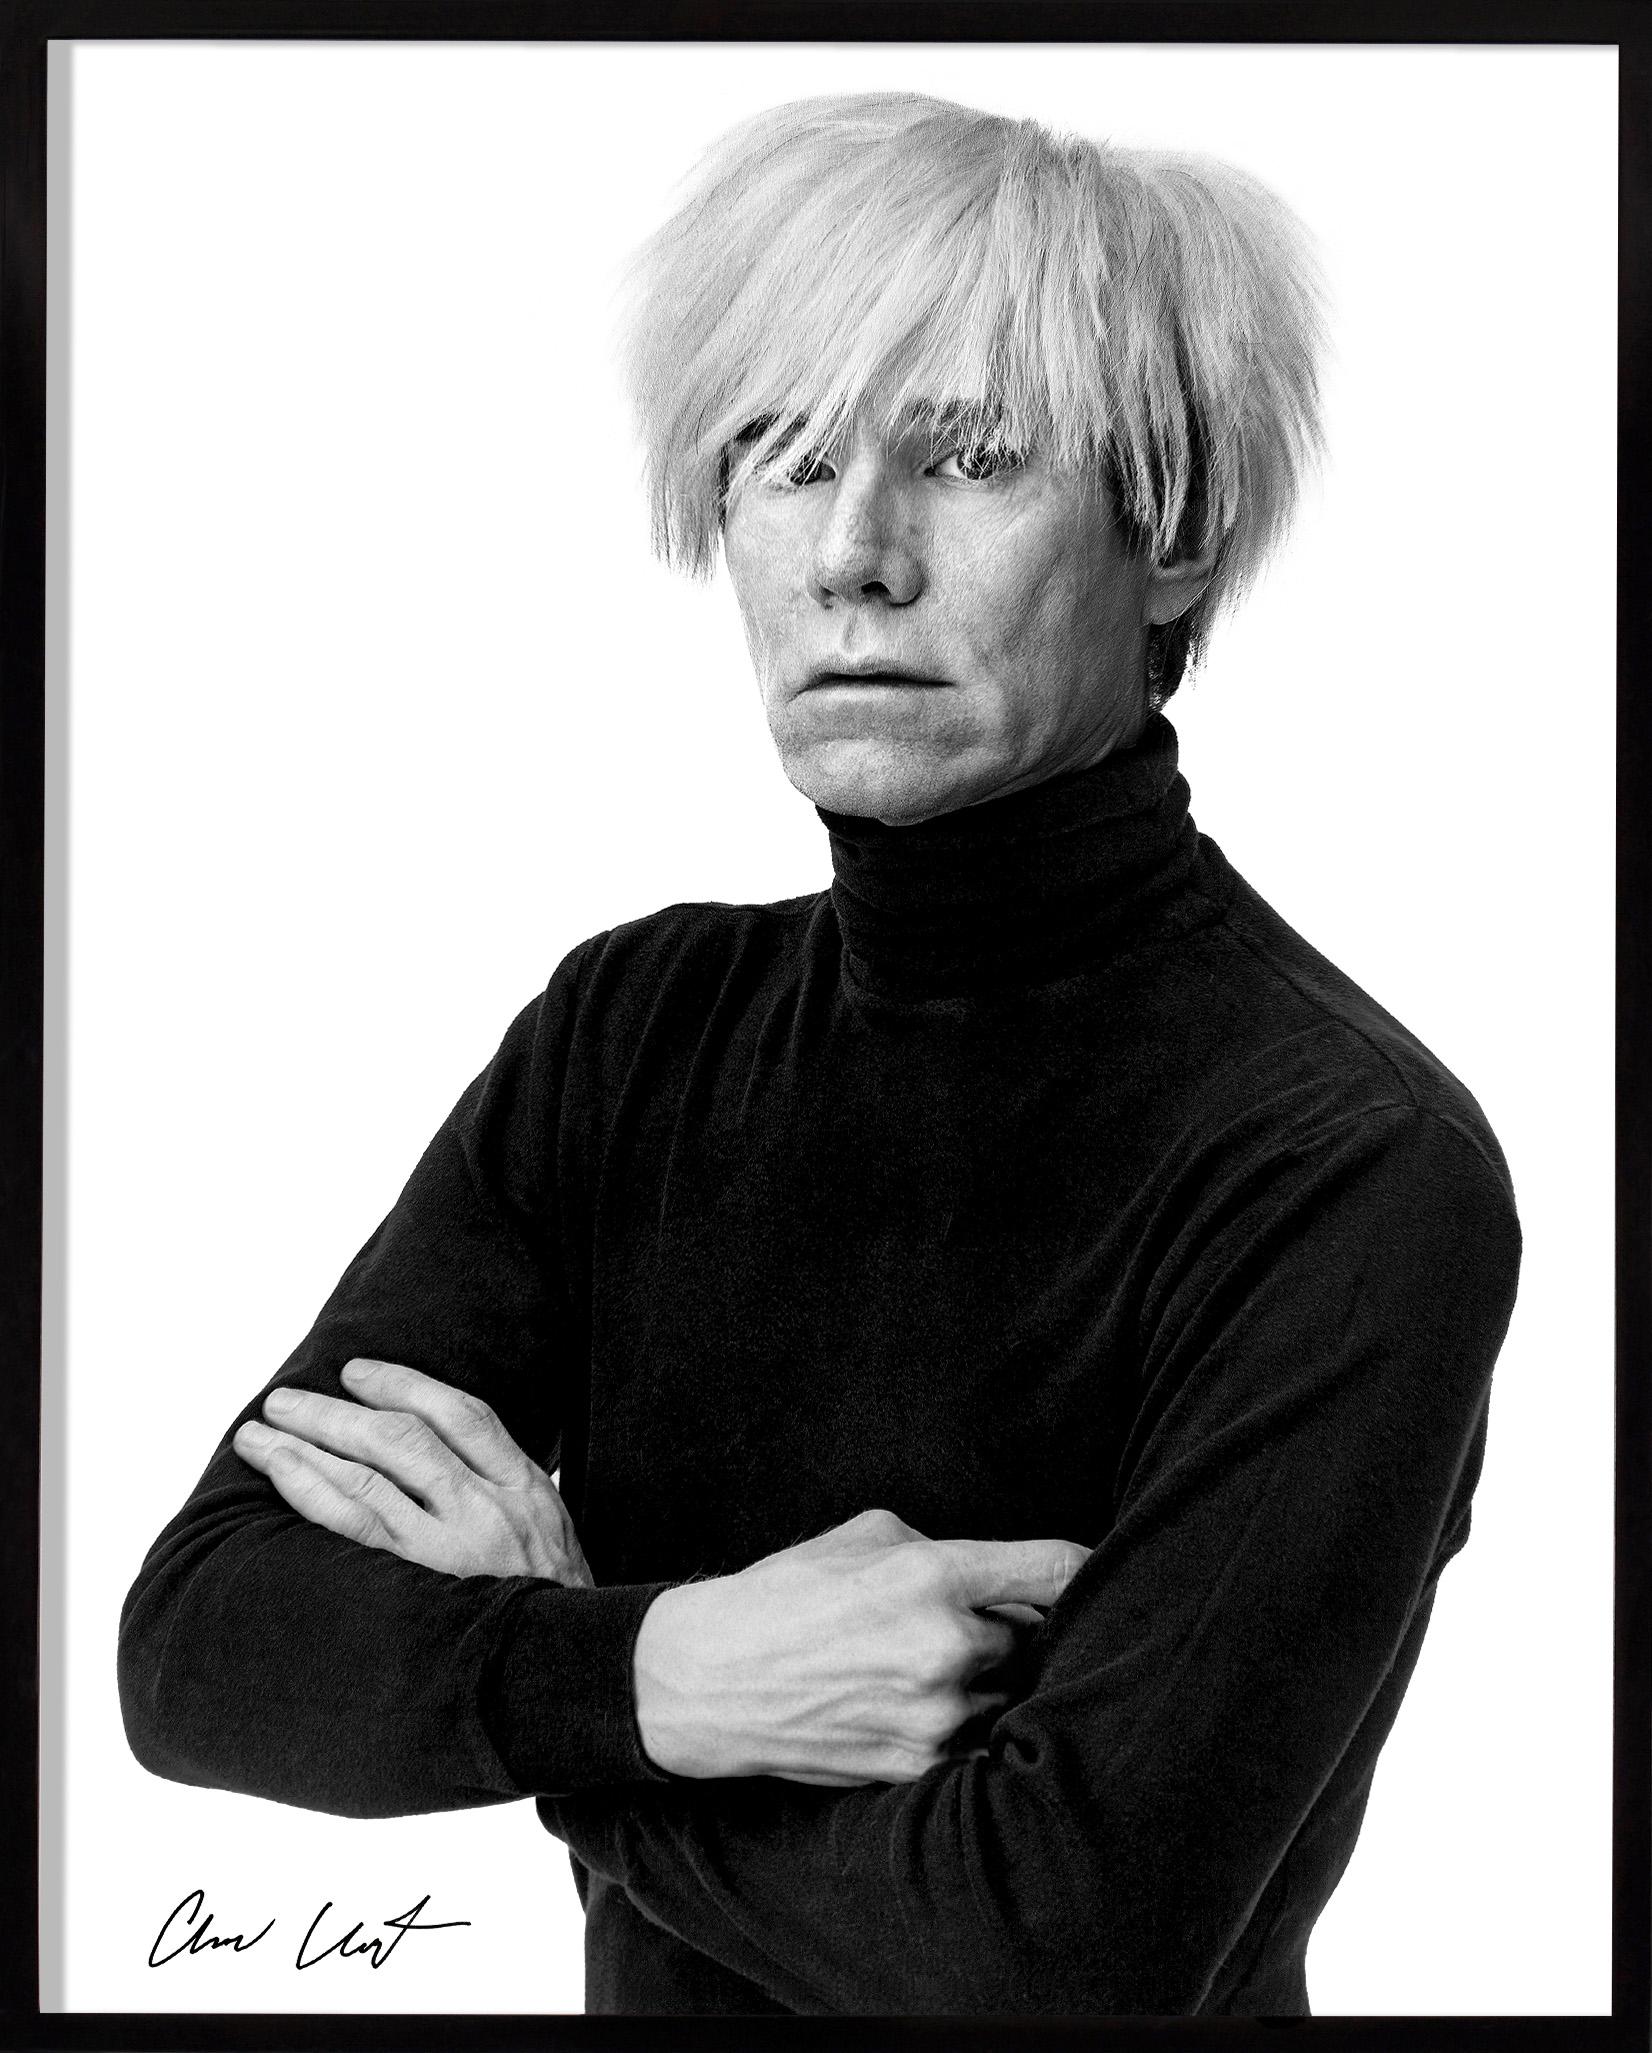 The archival ‘Portrait of Andy Warhol’ in black and white is a large-scale photographic pop-art print. This print is an edition of 15 and the photo was taken in 1985 by photographer Andrew Unangst. Taken in New York City, Unangst had the opportunity